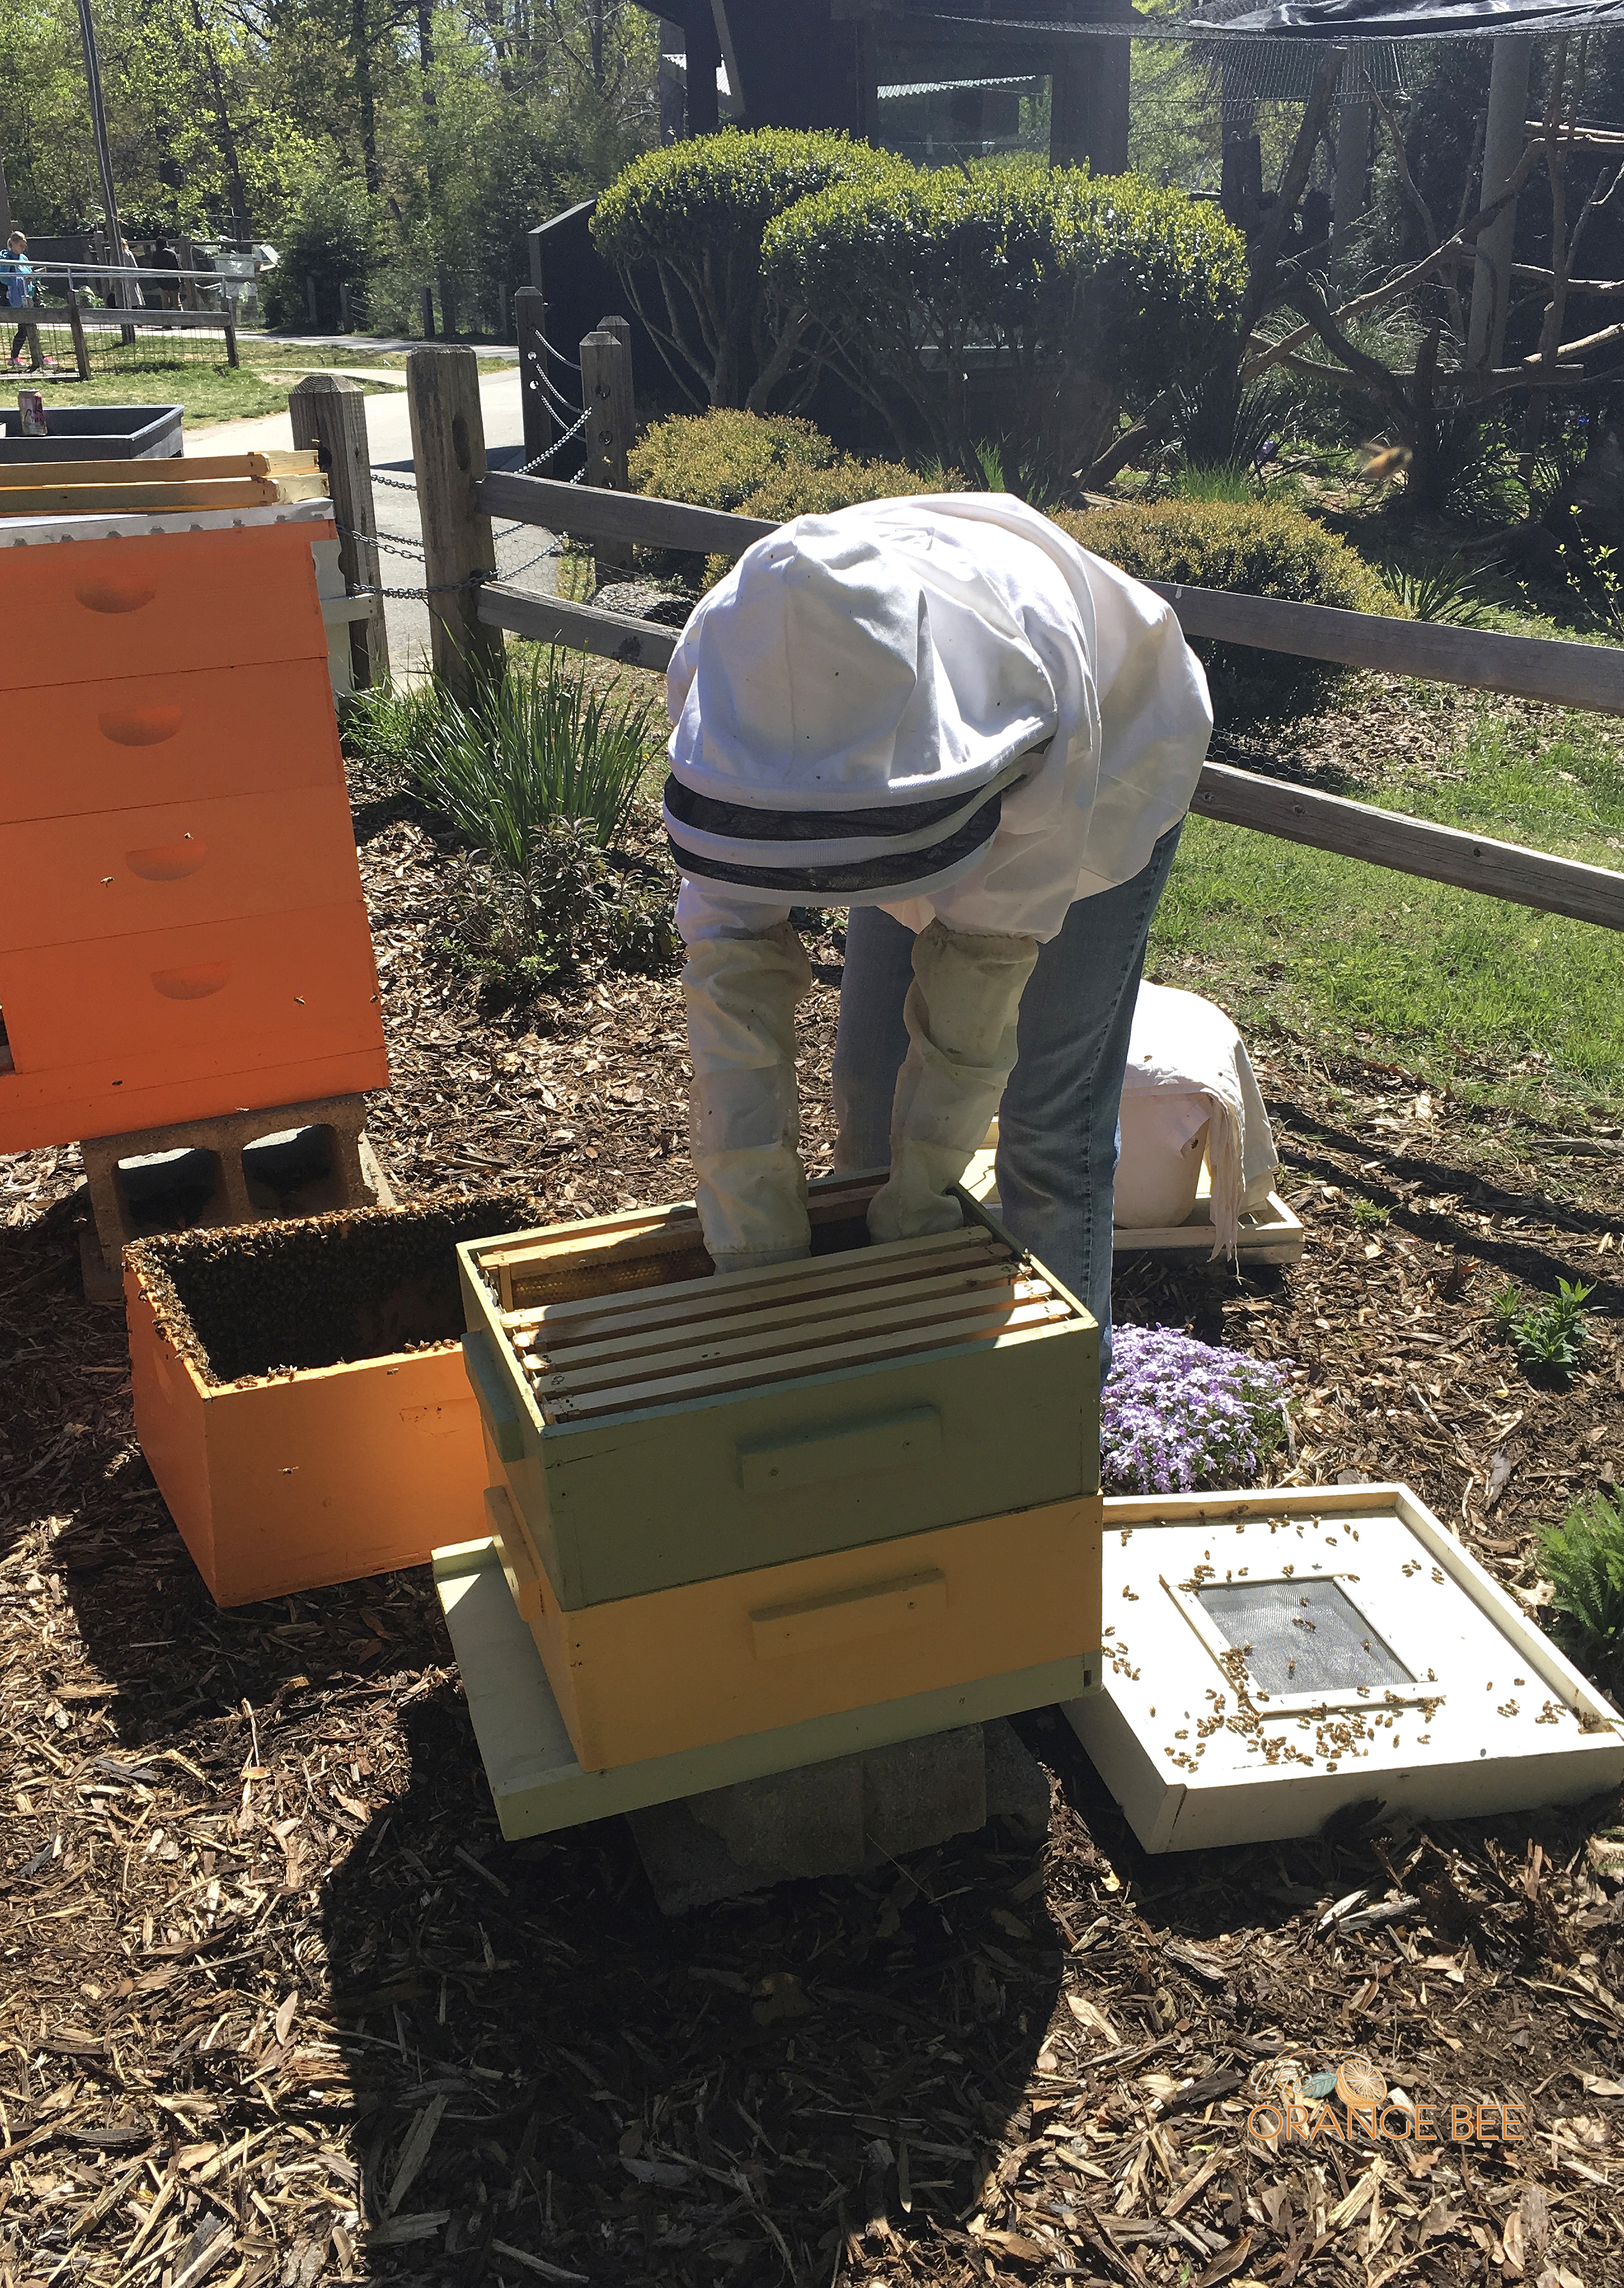 Placing the queen catcher inside the hive.